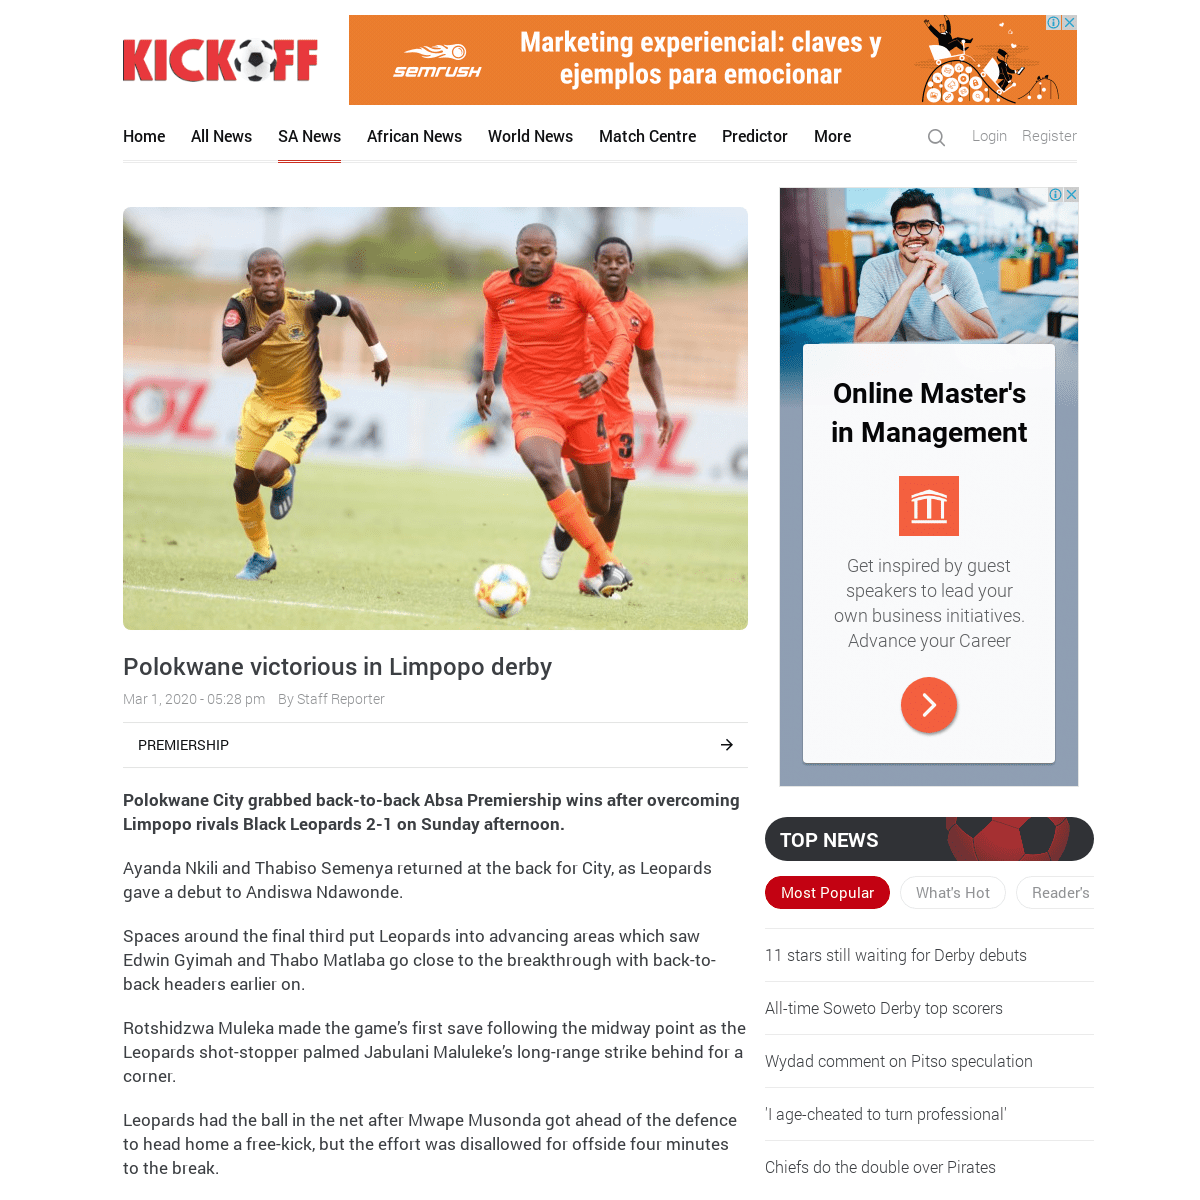 A complete backup of www.kickoff.com/news/articles/south-africa-news/categories/news/premiership/absa-premiership-match-report-p